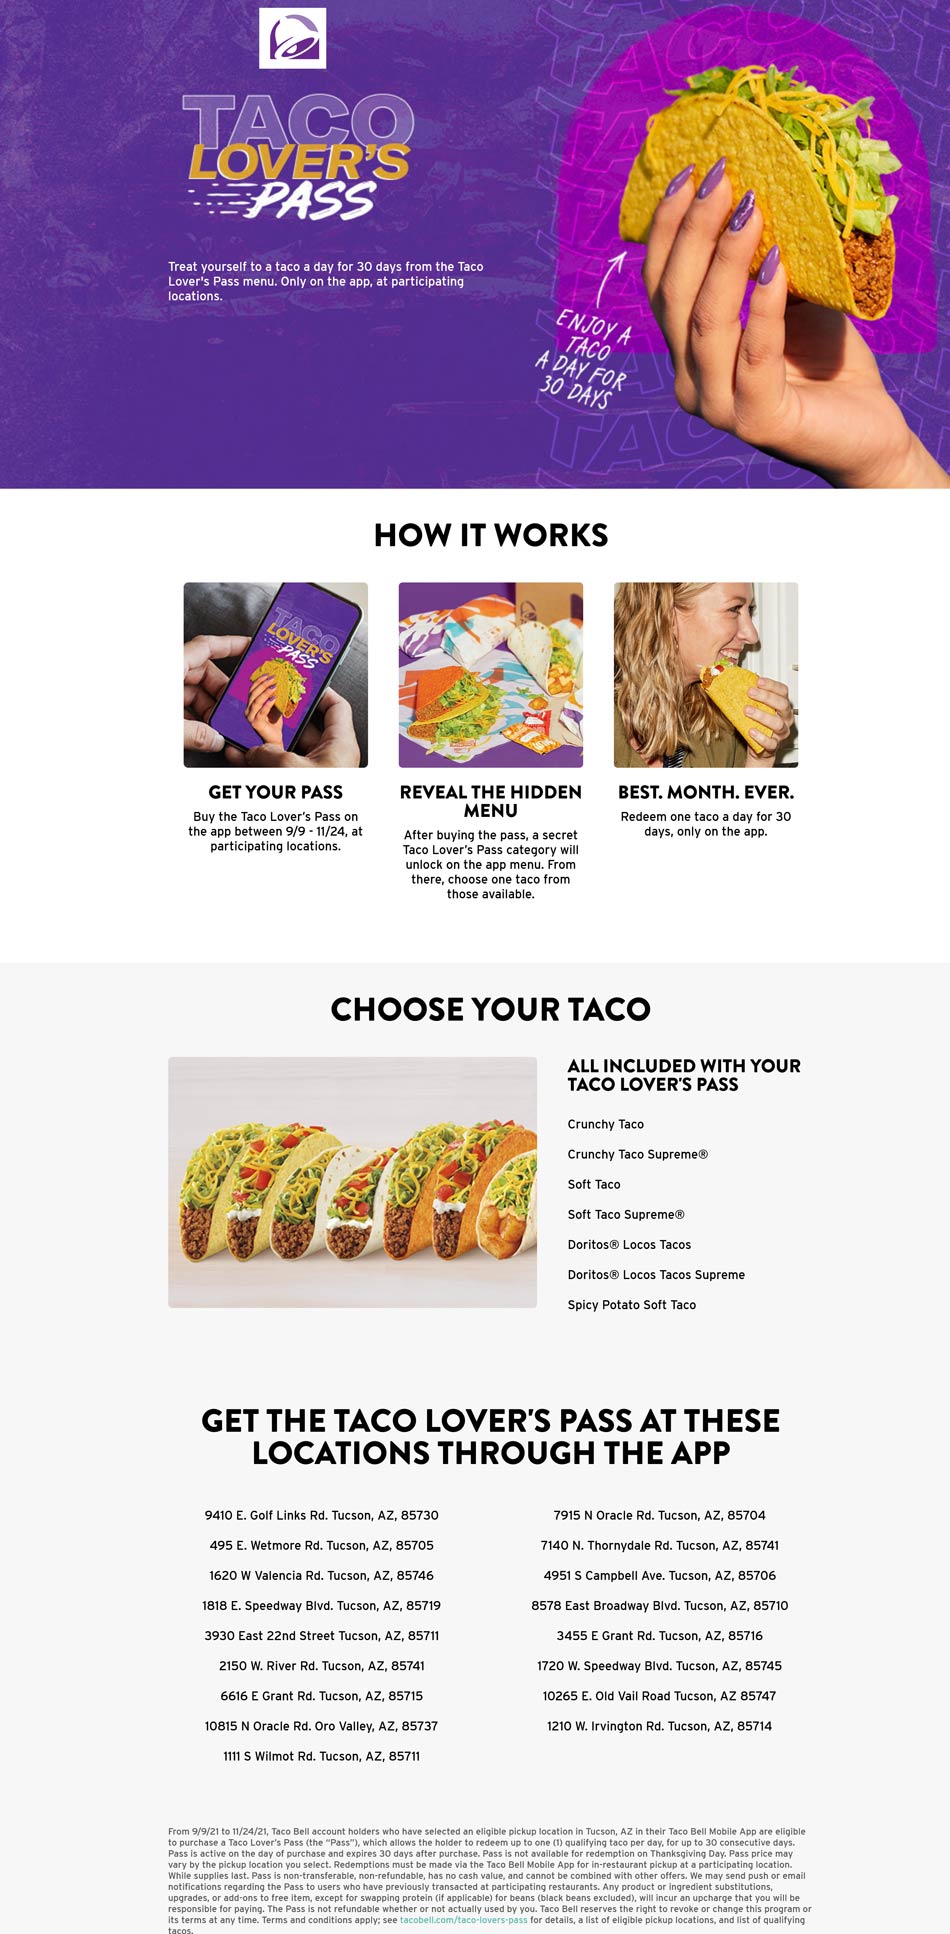 Taco Bell restaurants Coupon  $5-$10 monthly taco lovers pass redeemable for 1 taco daily at various Taco Bell locations #tacobell 